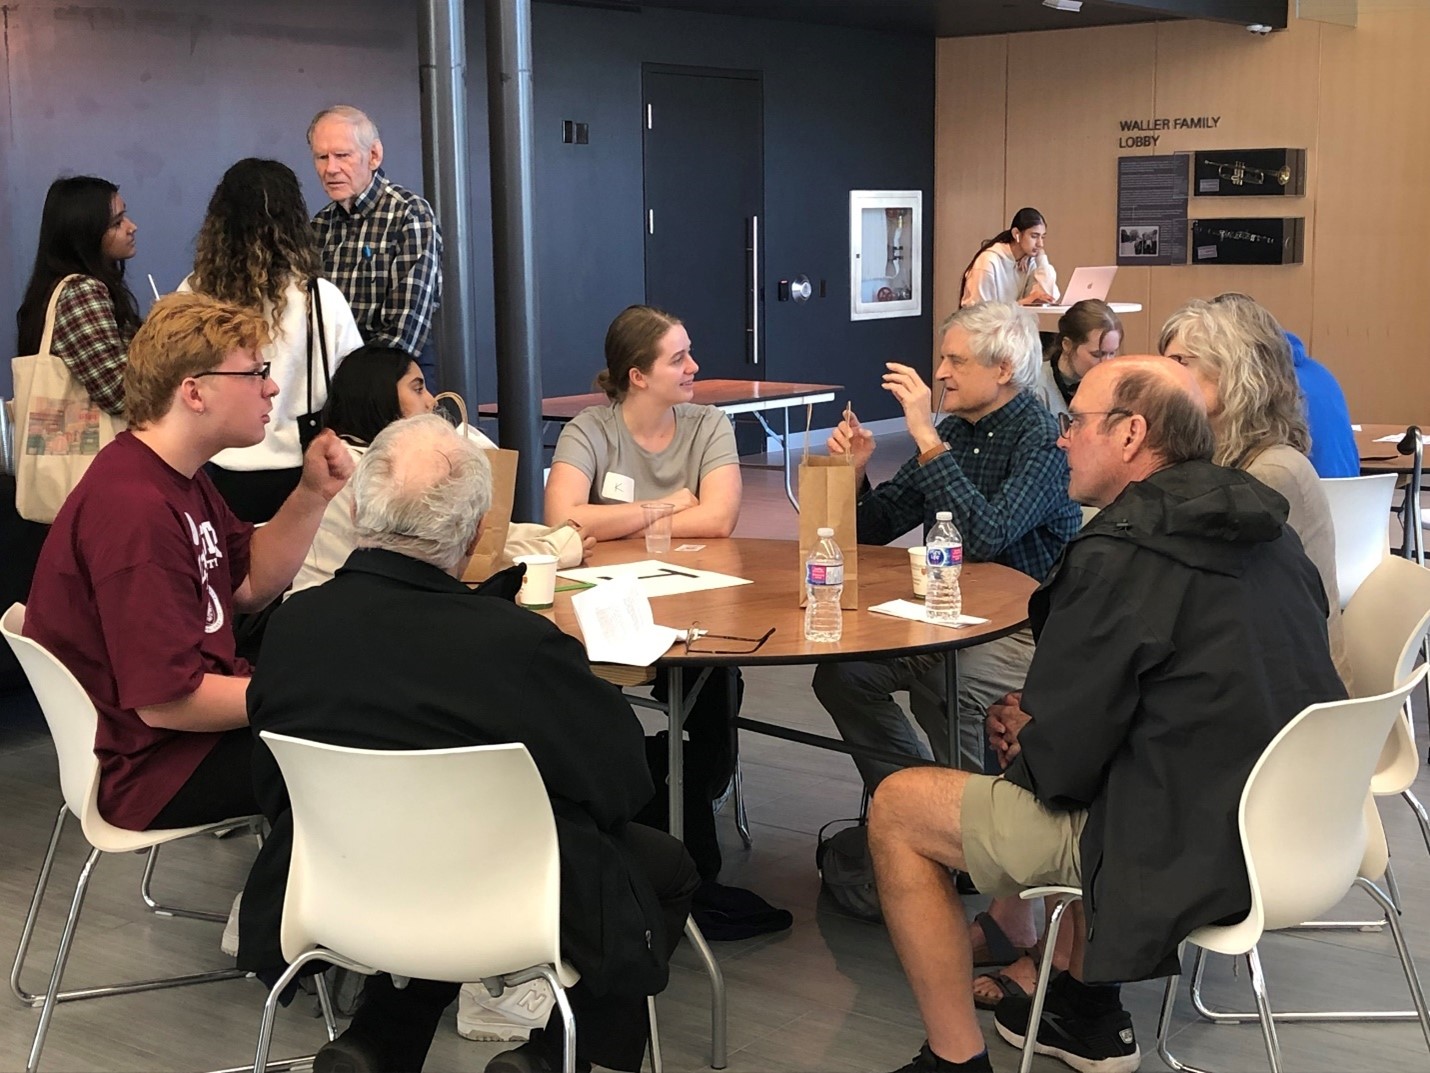 A group of students and older adults mingle at a table.